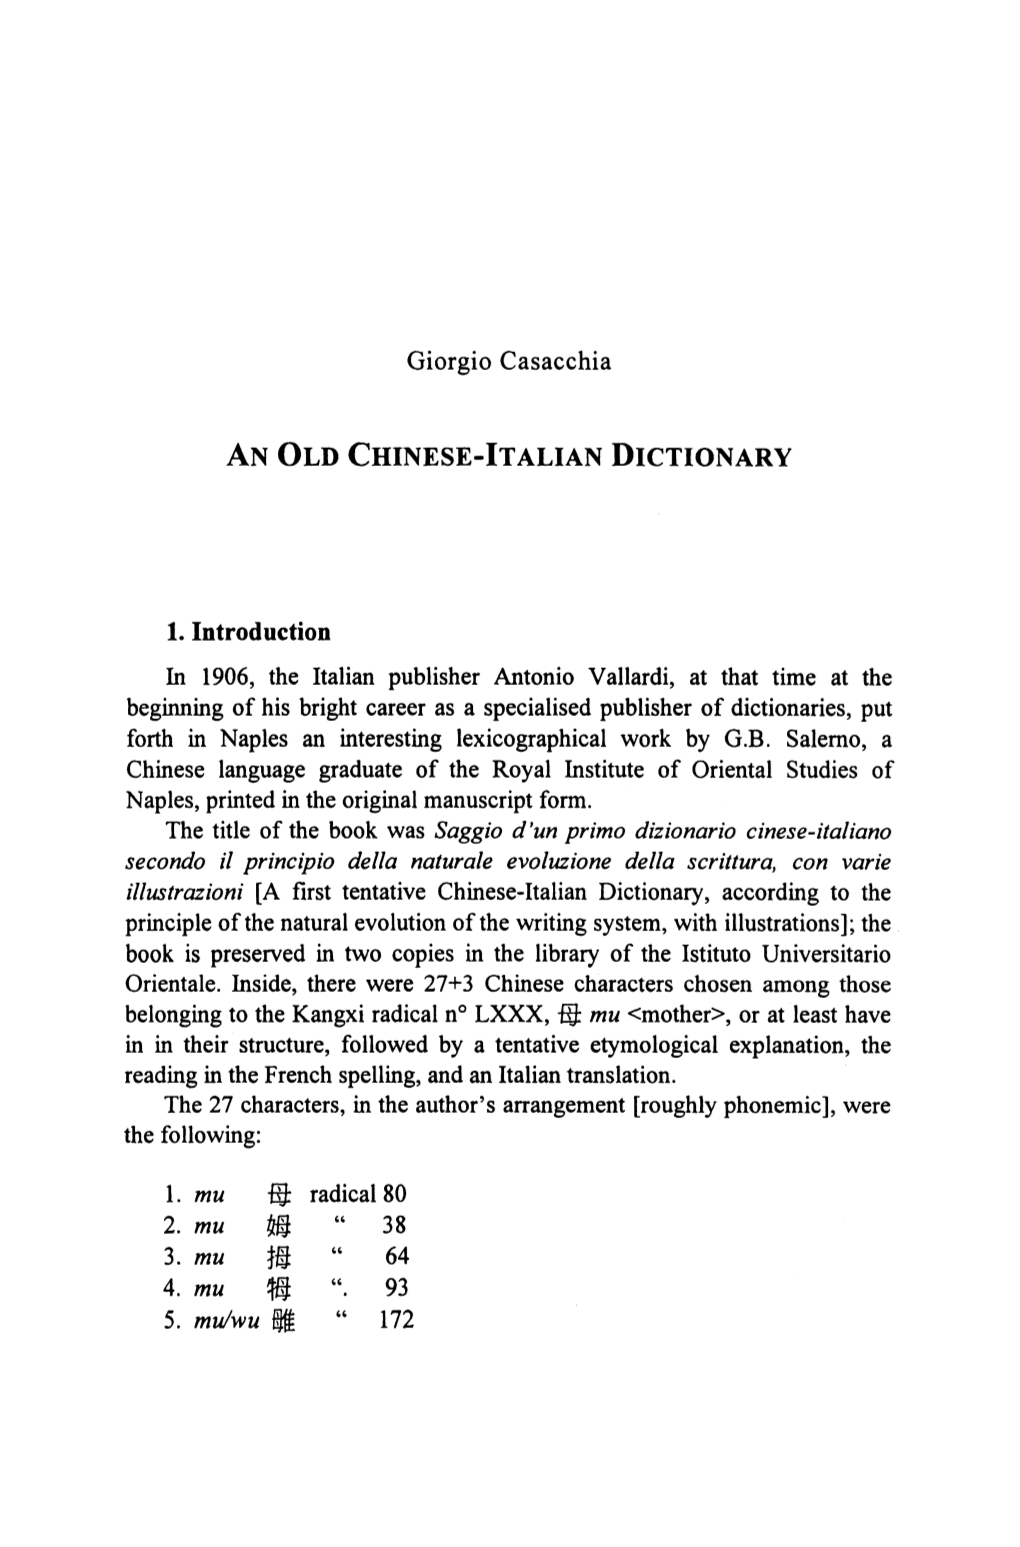 An Old Chinese-Italian Dictionary